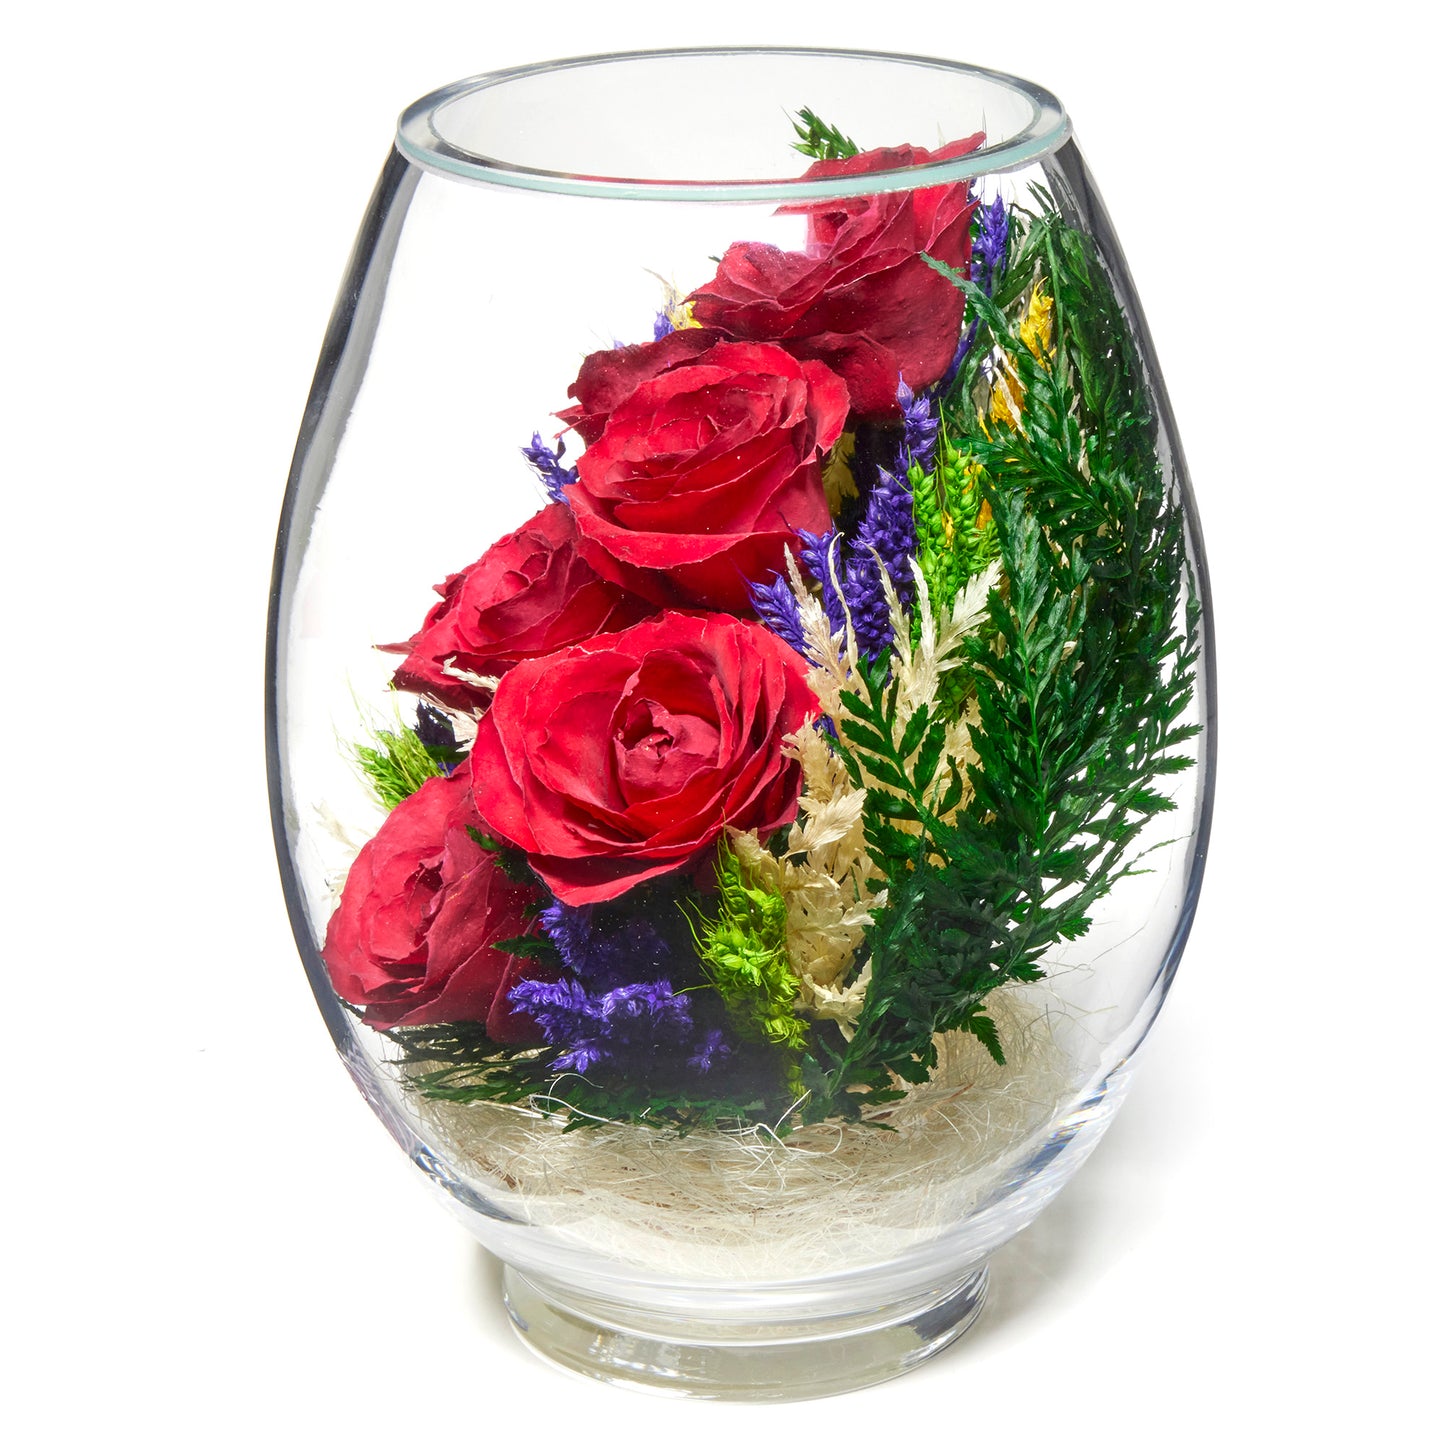 In Flores Veritas: Radiant Rose Cascade - Lasts up to 5 Years - Elegant Gift for Any Occasion